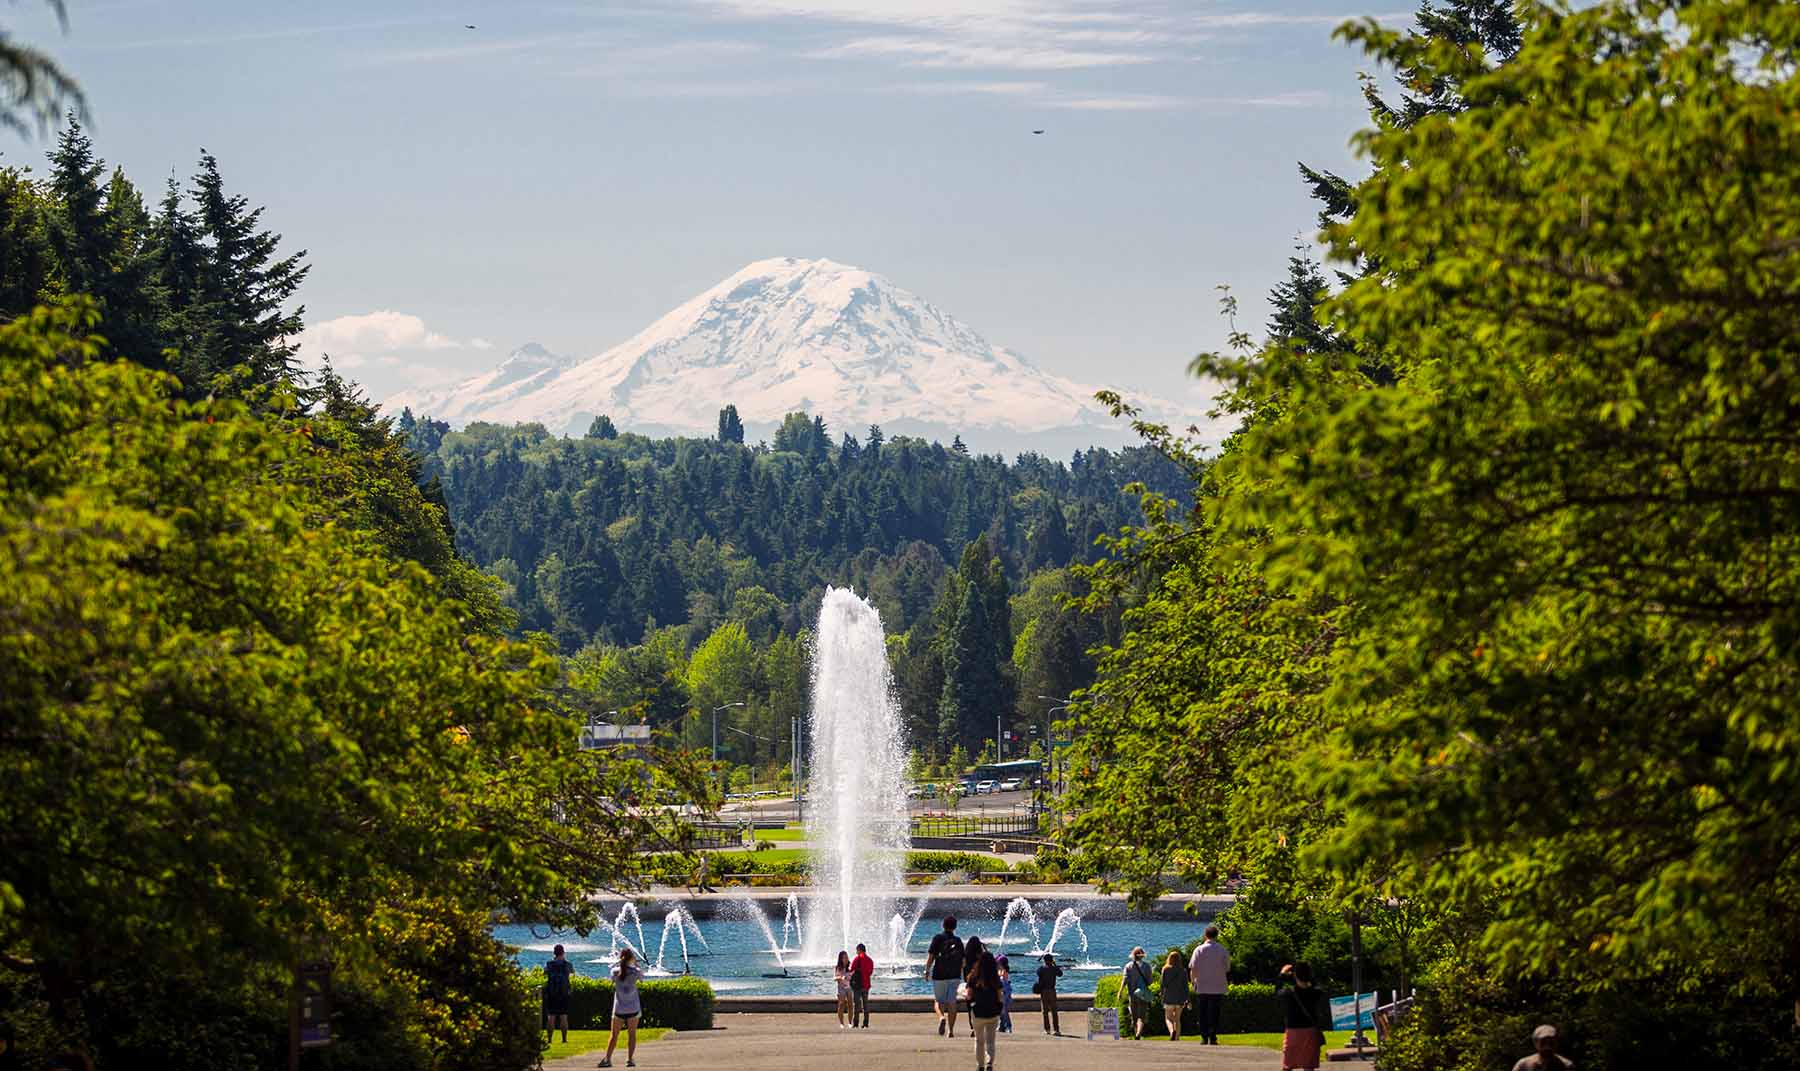 View of Drumheller Fountain with Mt. Rainier in the background